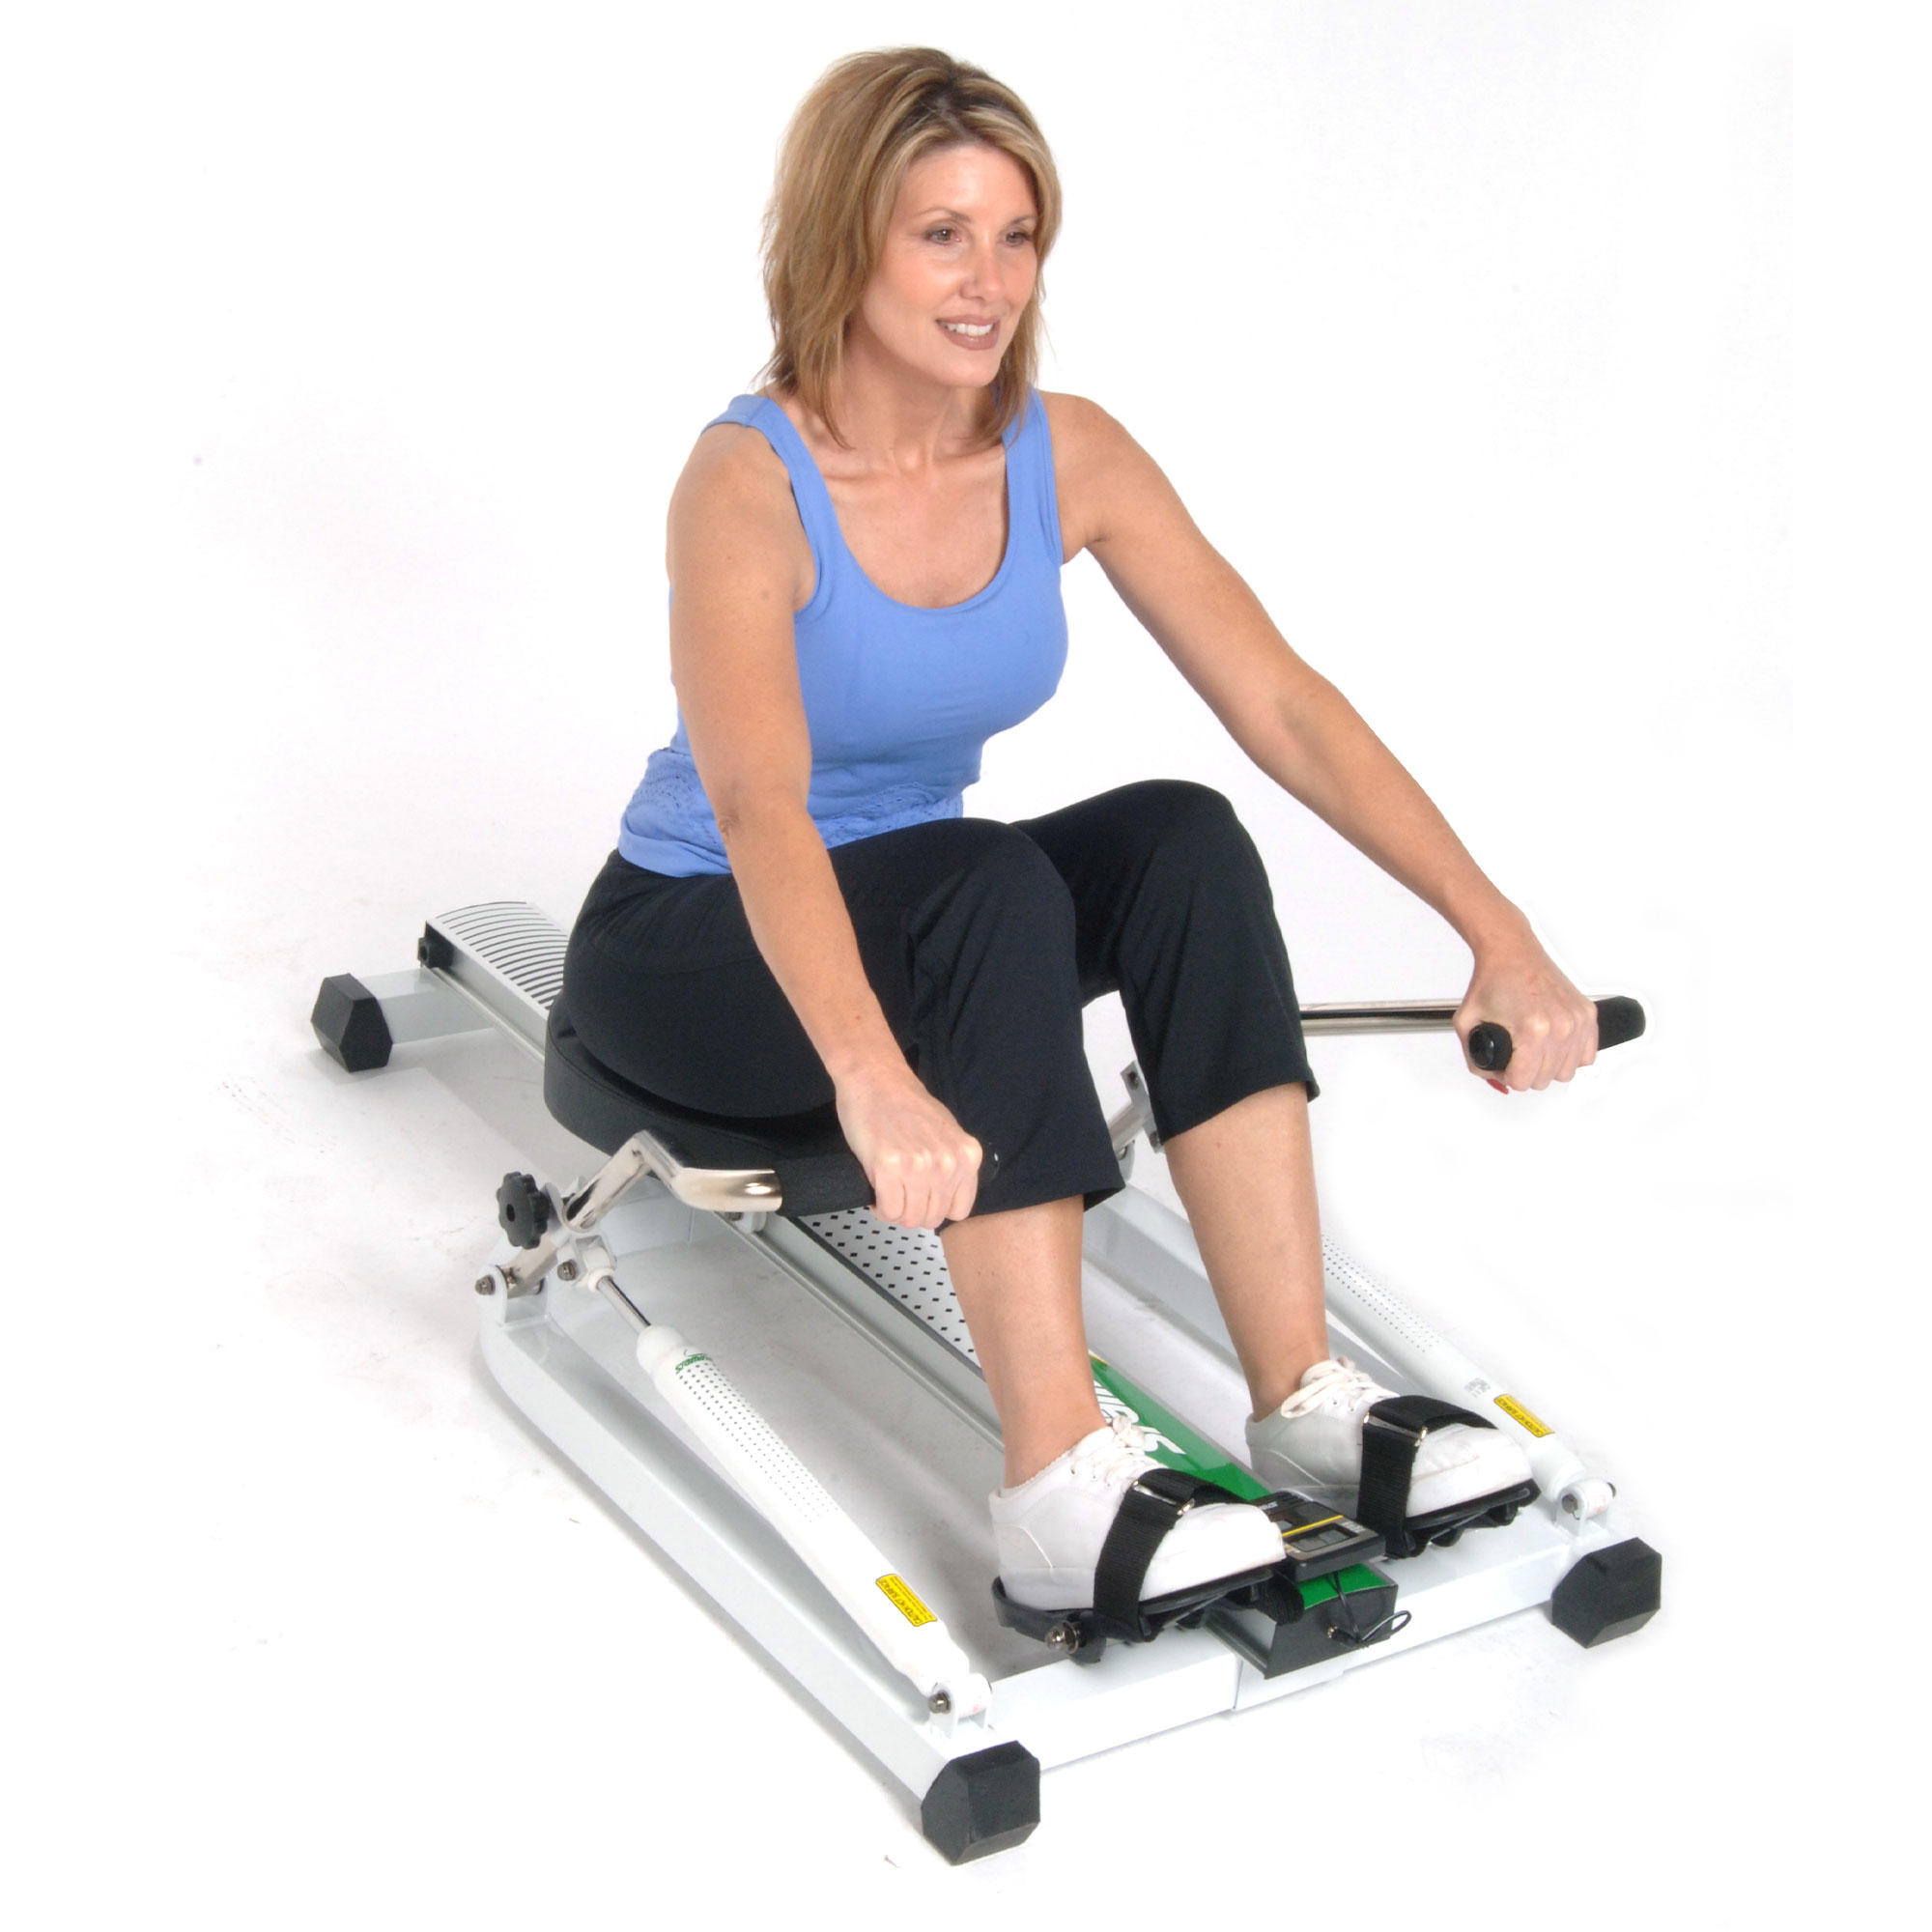 Stamina Products 35-1205 Low Impact Home Fitness Precision Rowing Machine - image 3 of 6